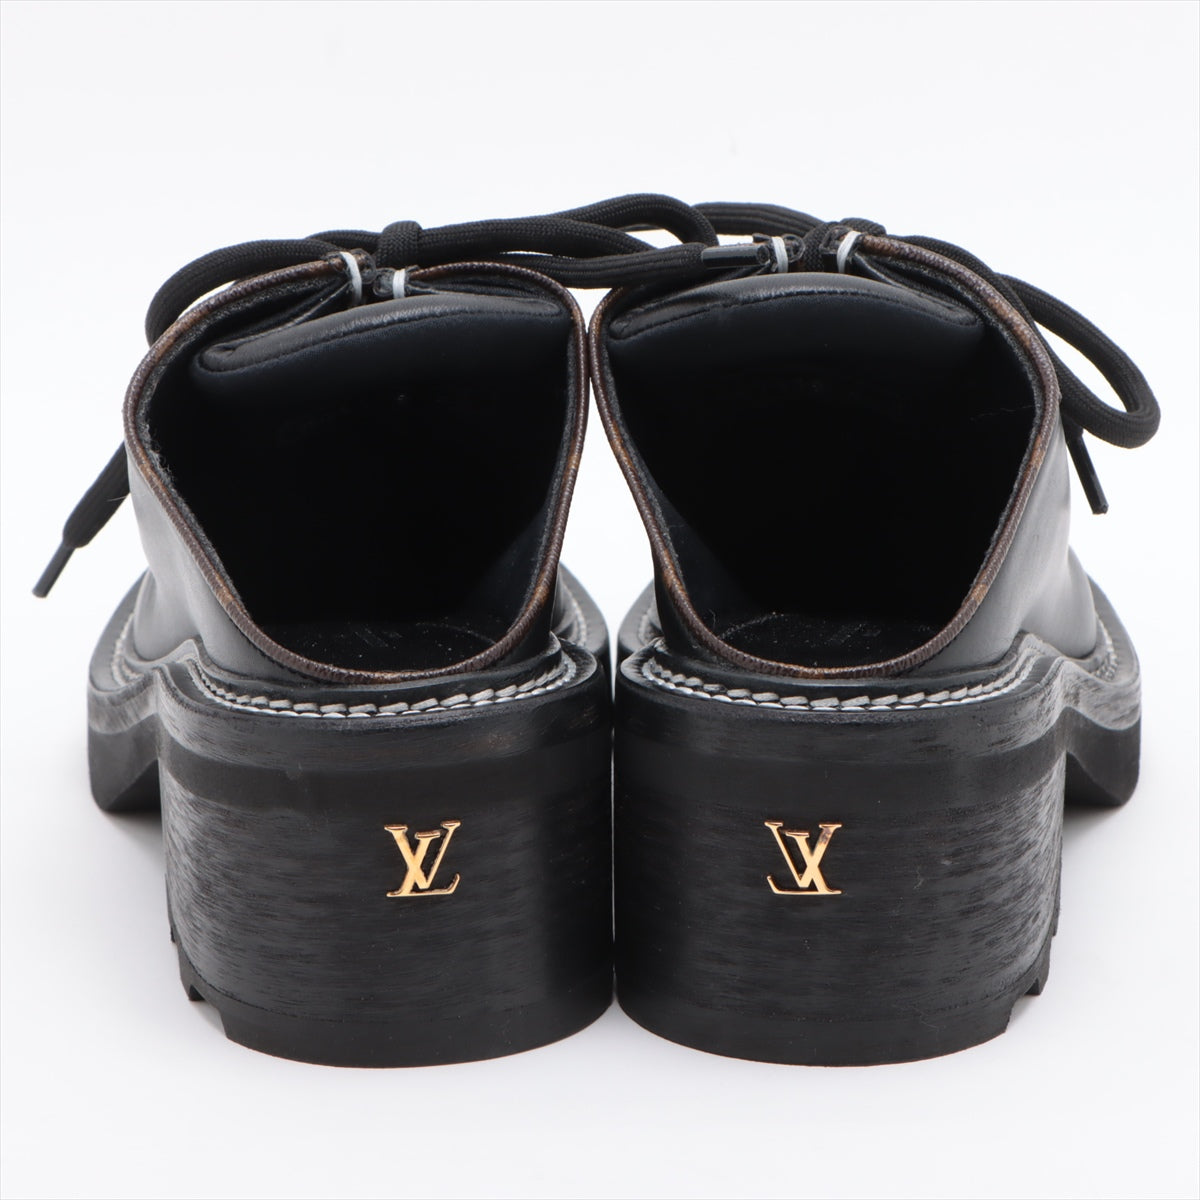 Louis Vuitton LV bobour line 19-year Leather Leather shoes 40 Ladies' Black × Brown MA1119 Monogram There is a box Has a V mark